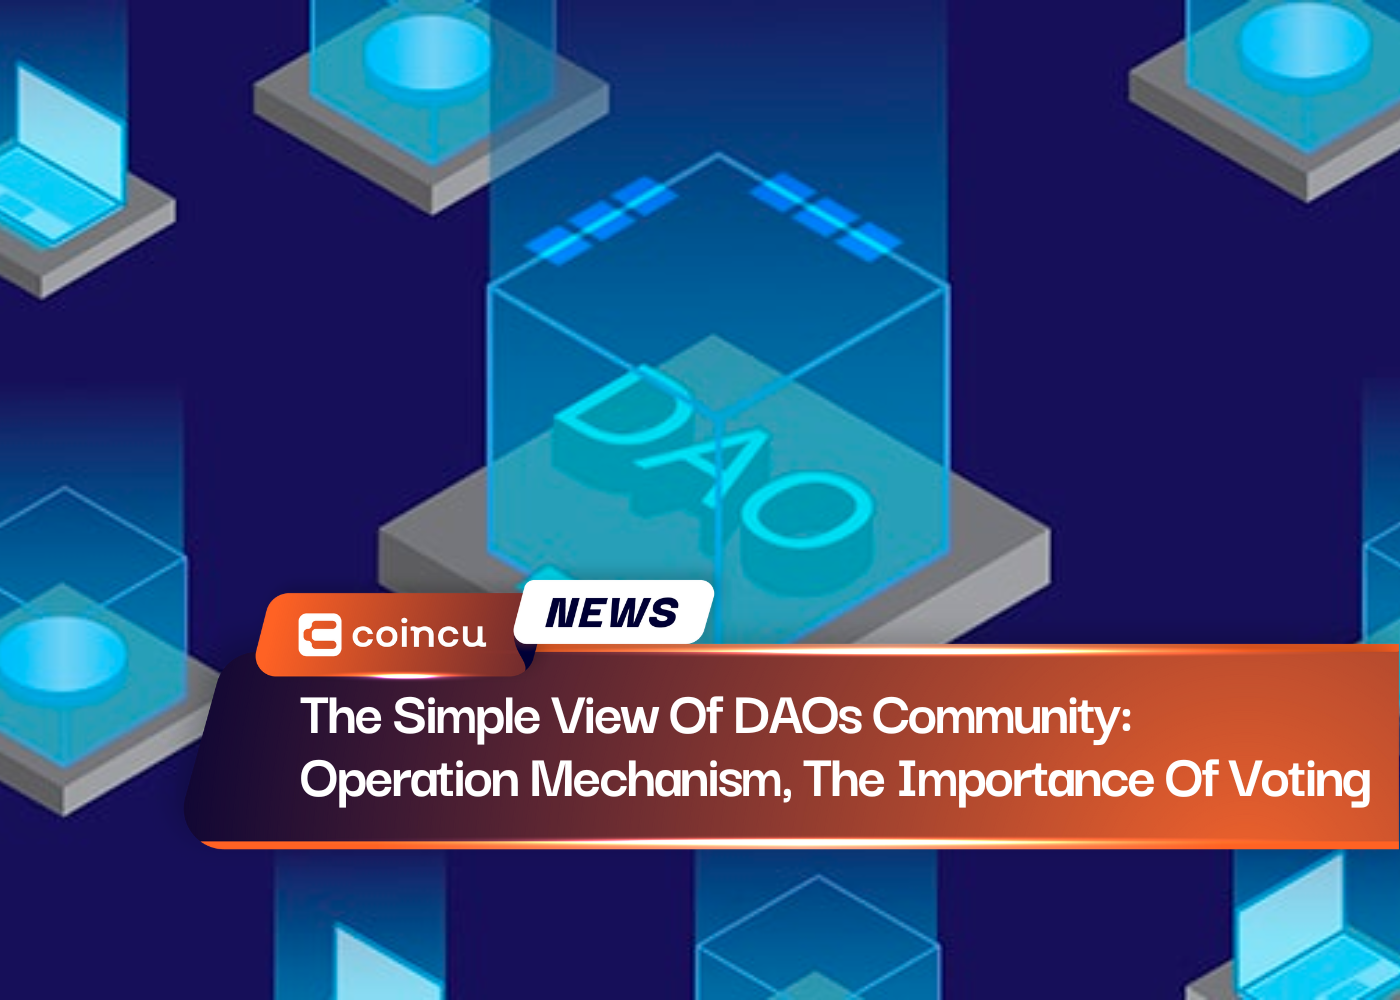 The Simple View Of DAOs Community: Operation Mechanism, The Importance Of Voting